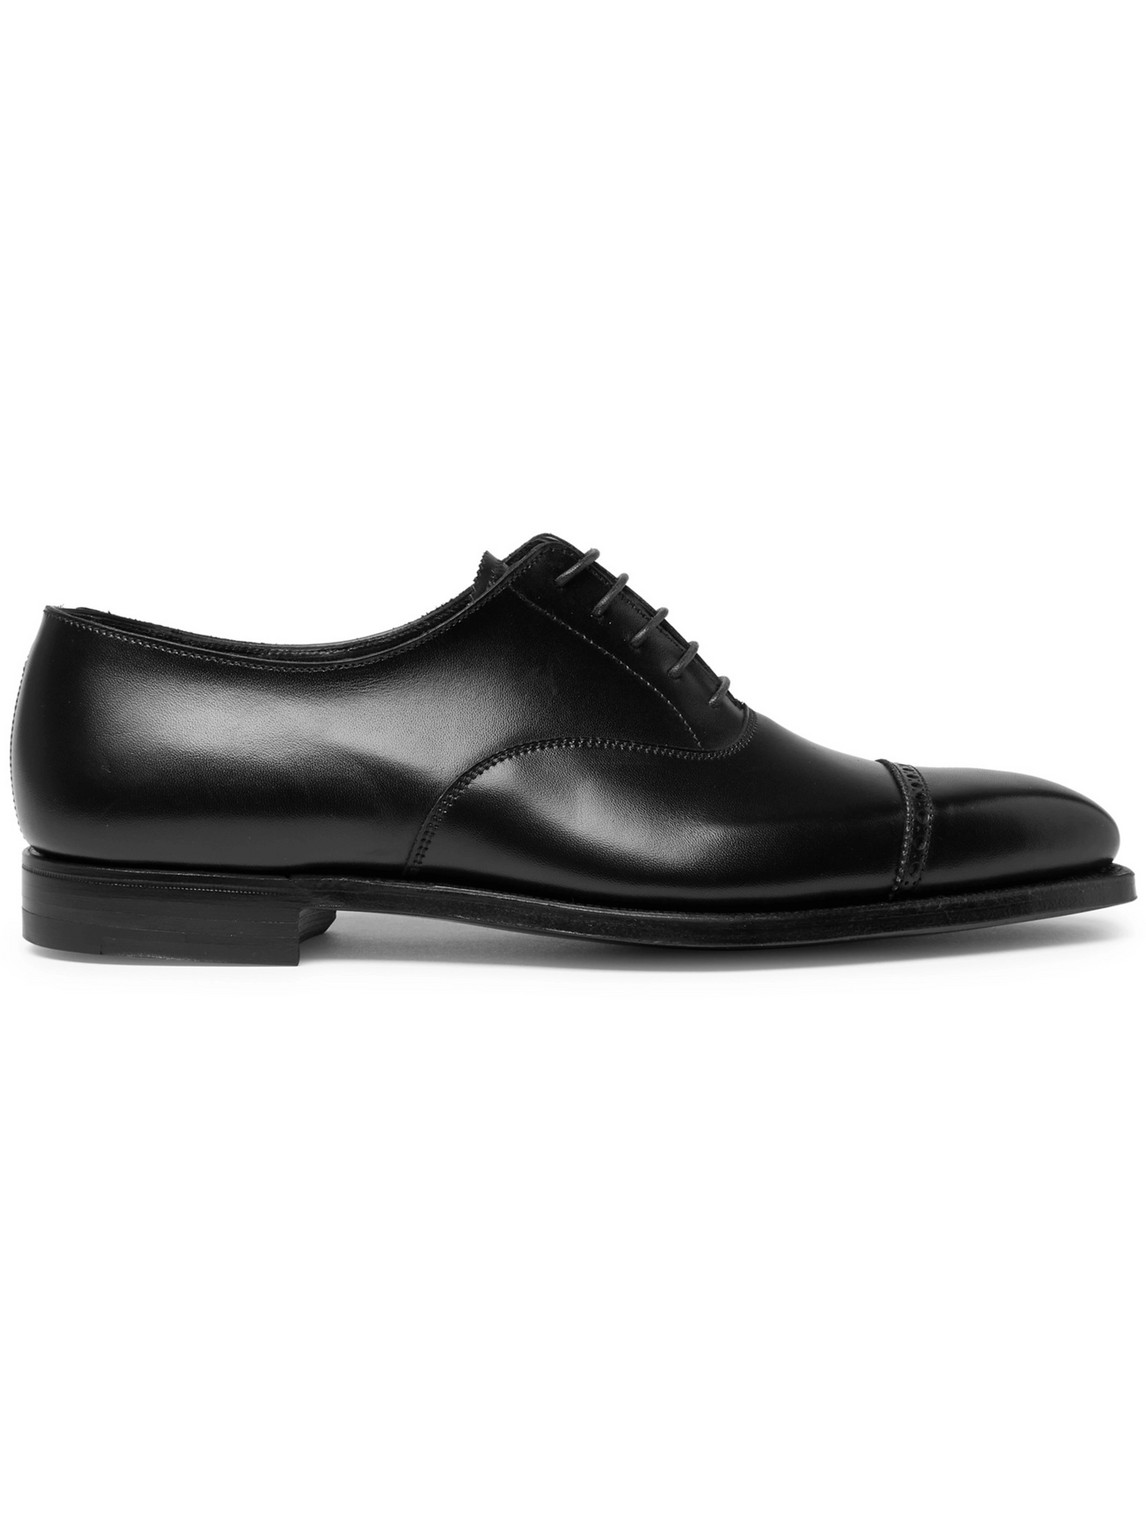 GEORGE CLEVERLEY CHARLES CAP-TOE LEATHER OXFORD SHOES